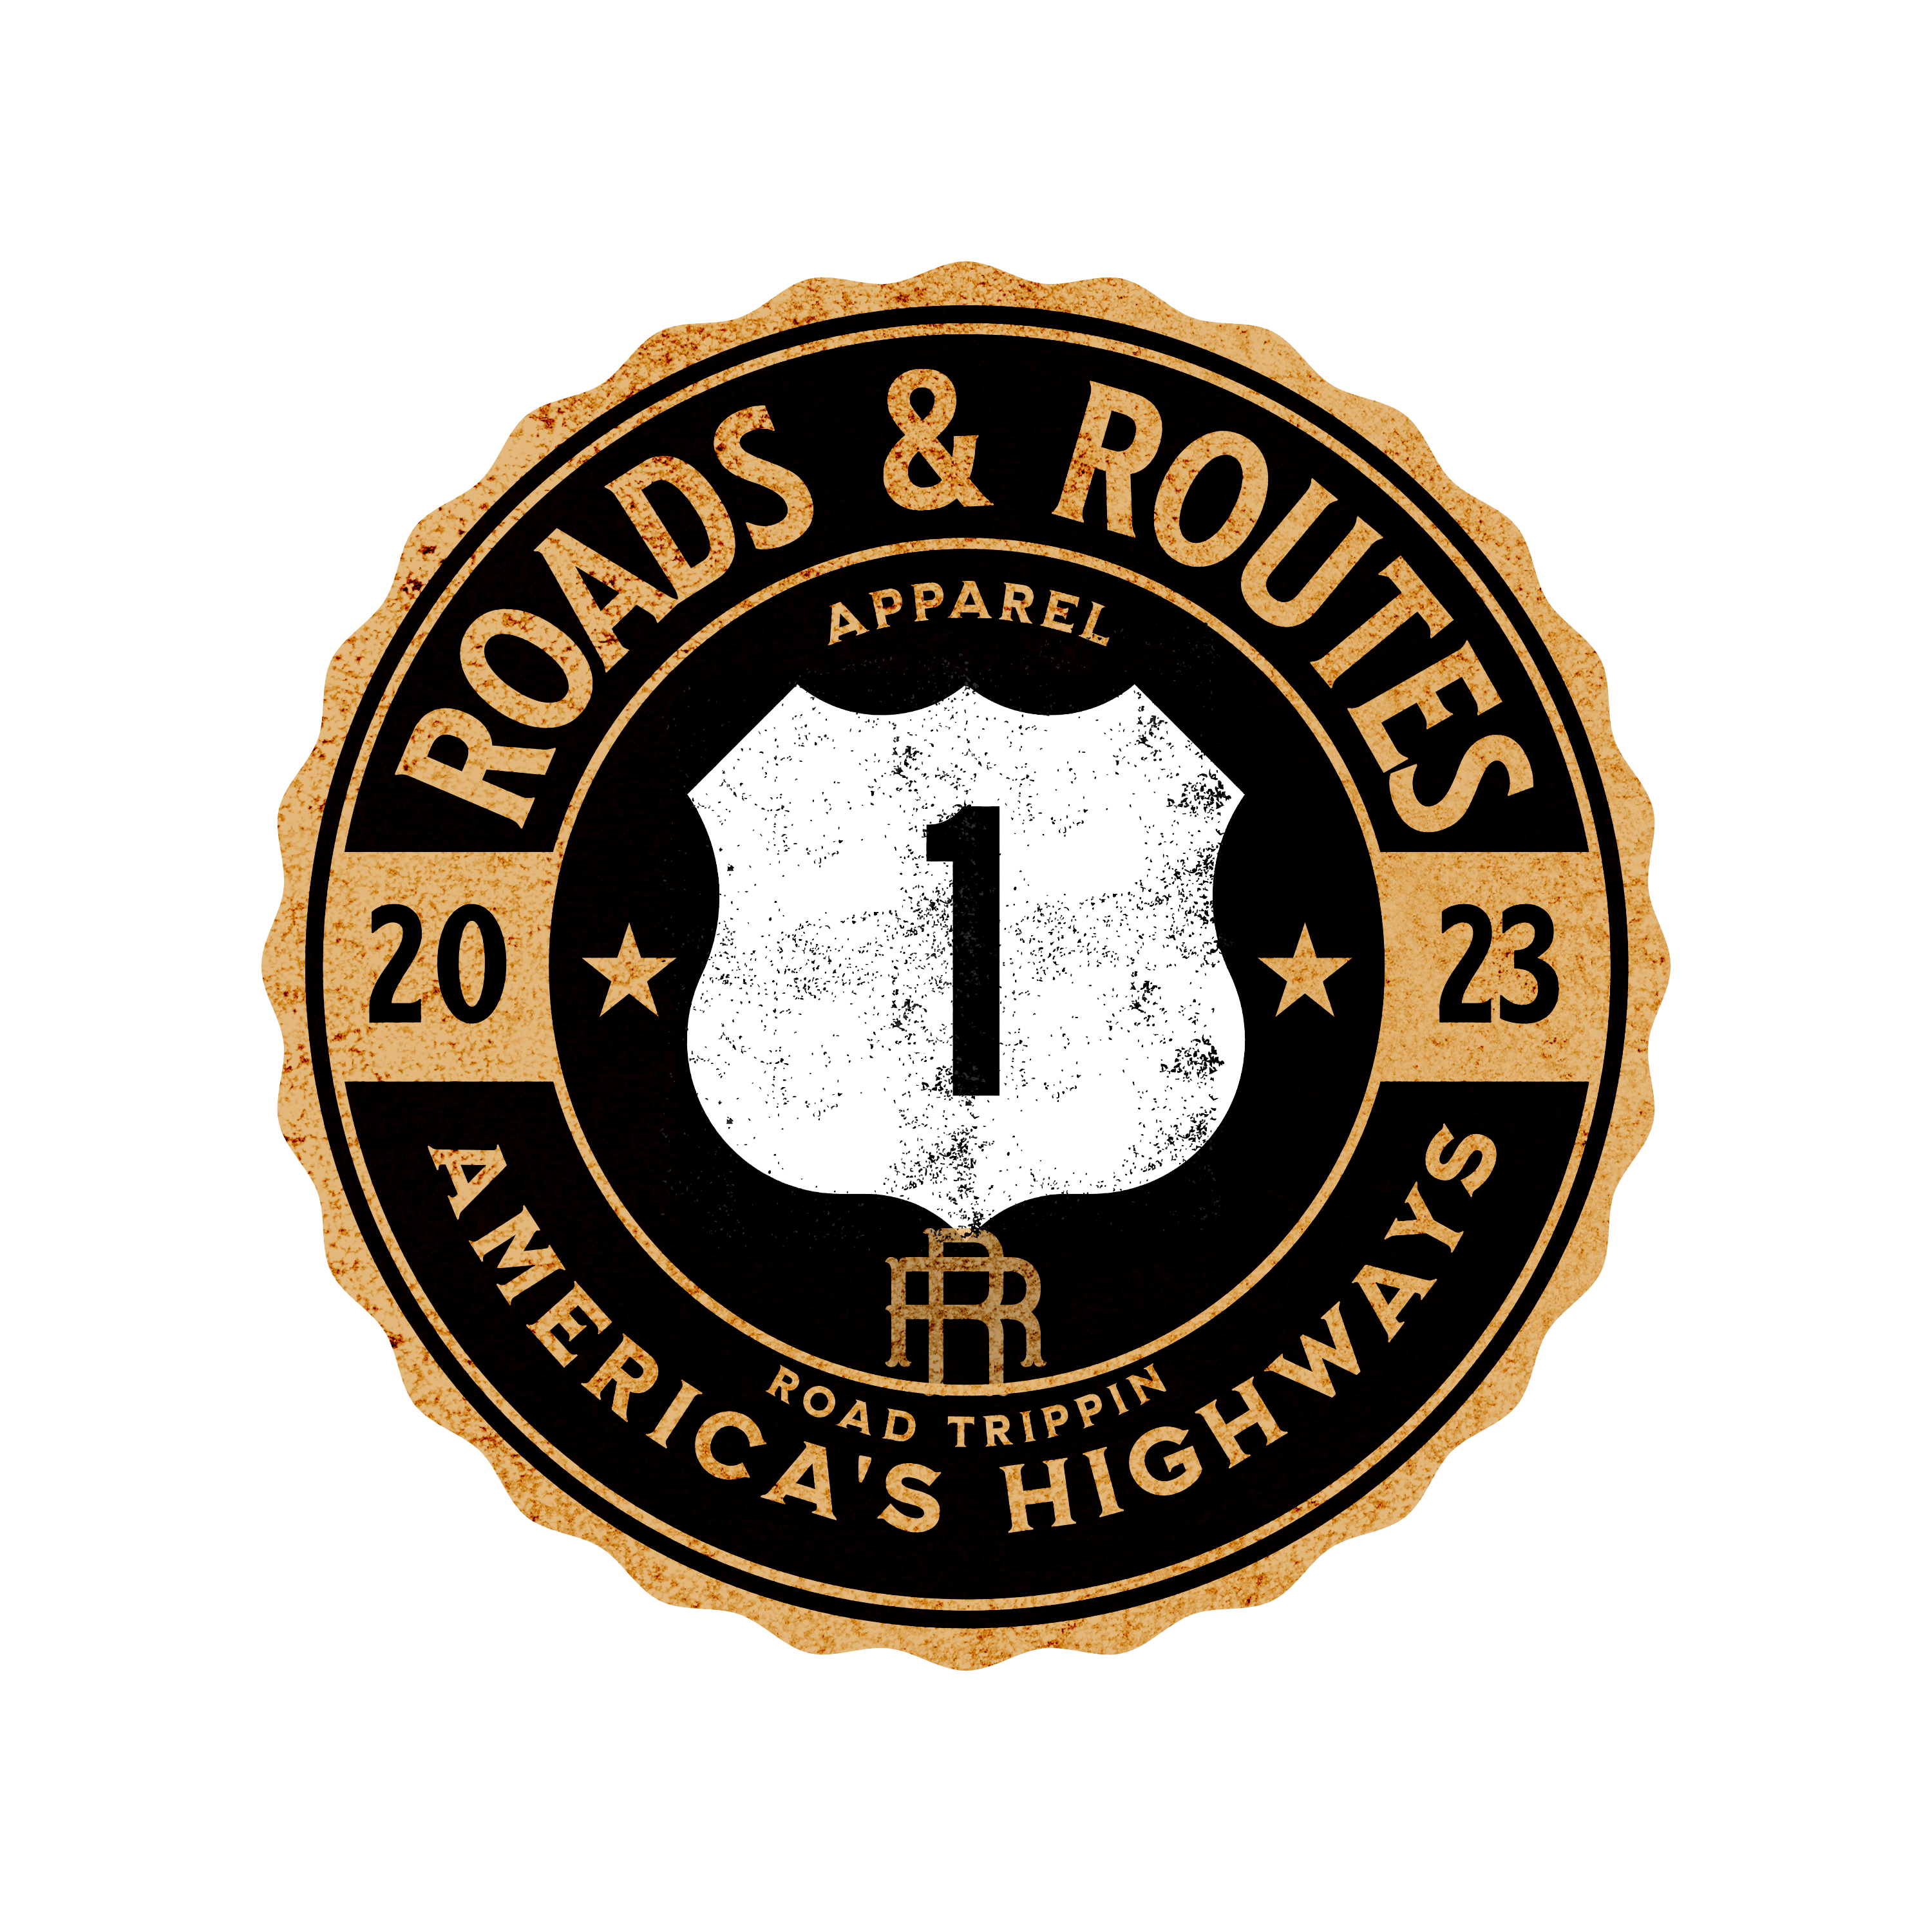 Roads and Routes Apparel